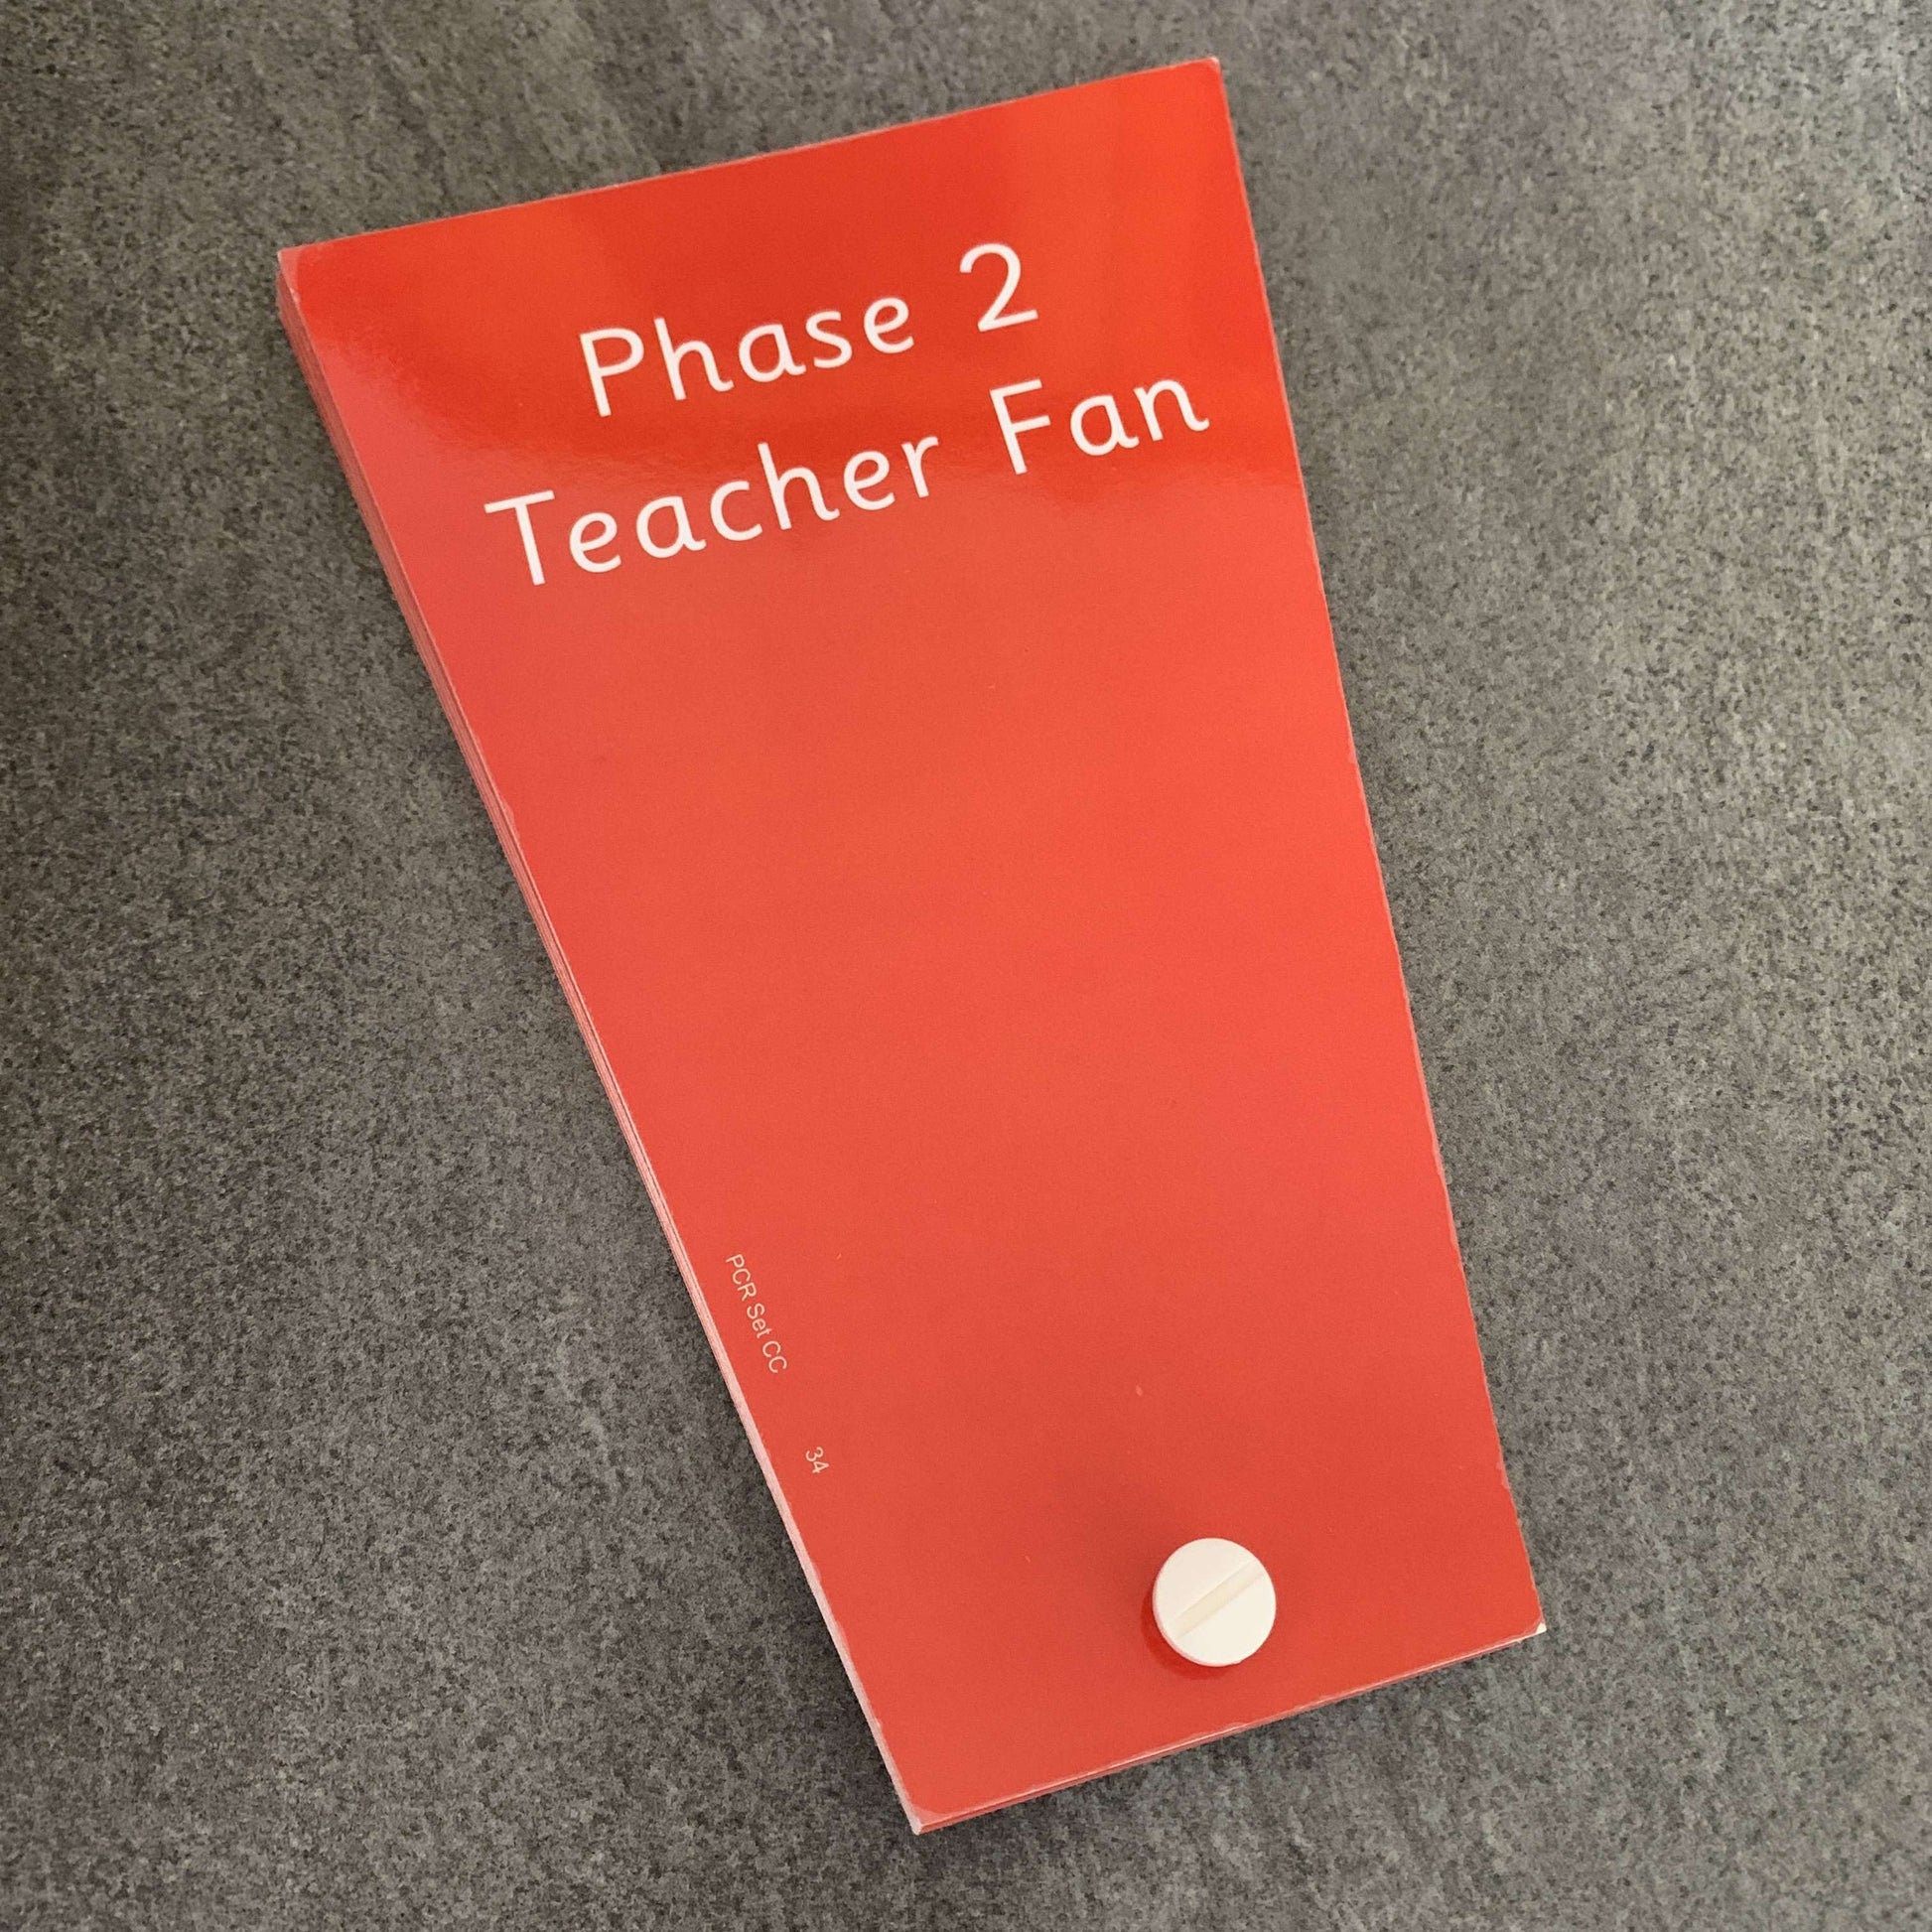 Letters and Sounds Phase 2 Teacher Fan - Ready made:Primary Classroom Resources